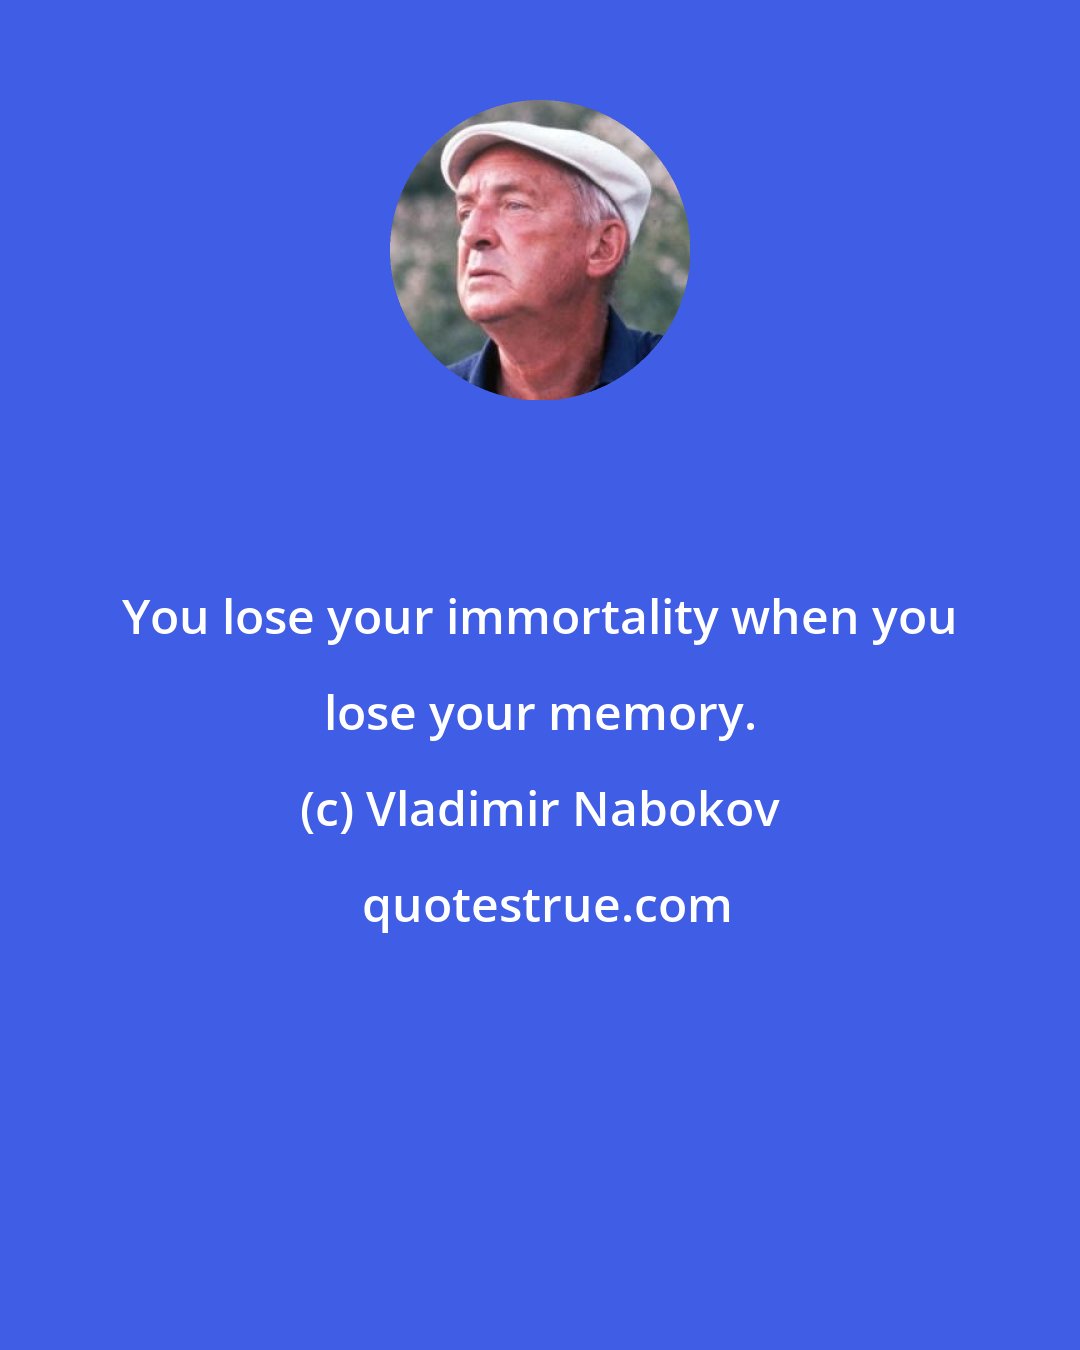 Vladimir Nabokov: You lose your immortality when you lose your memory.